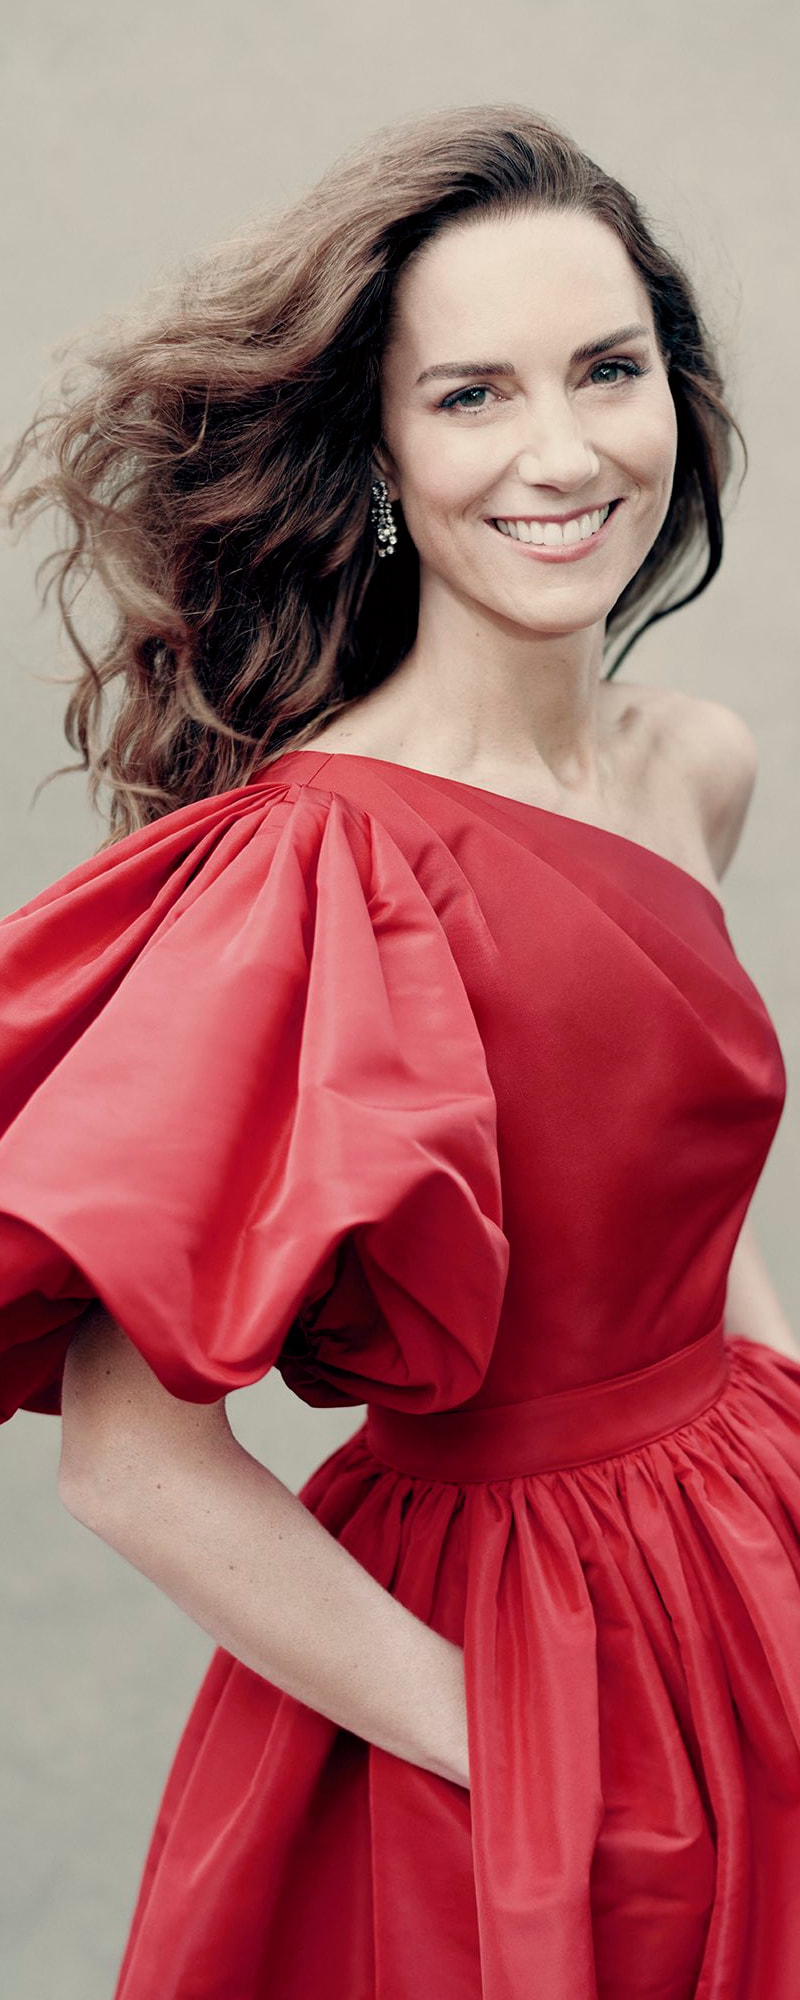 Alexander McQueen Asymmetric Draped Sleeve Dress in Red as seen on Kate Middleton, The Duchess of Cambridge.